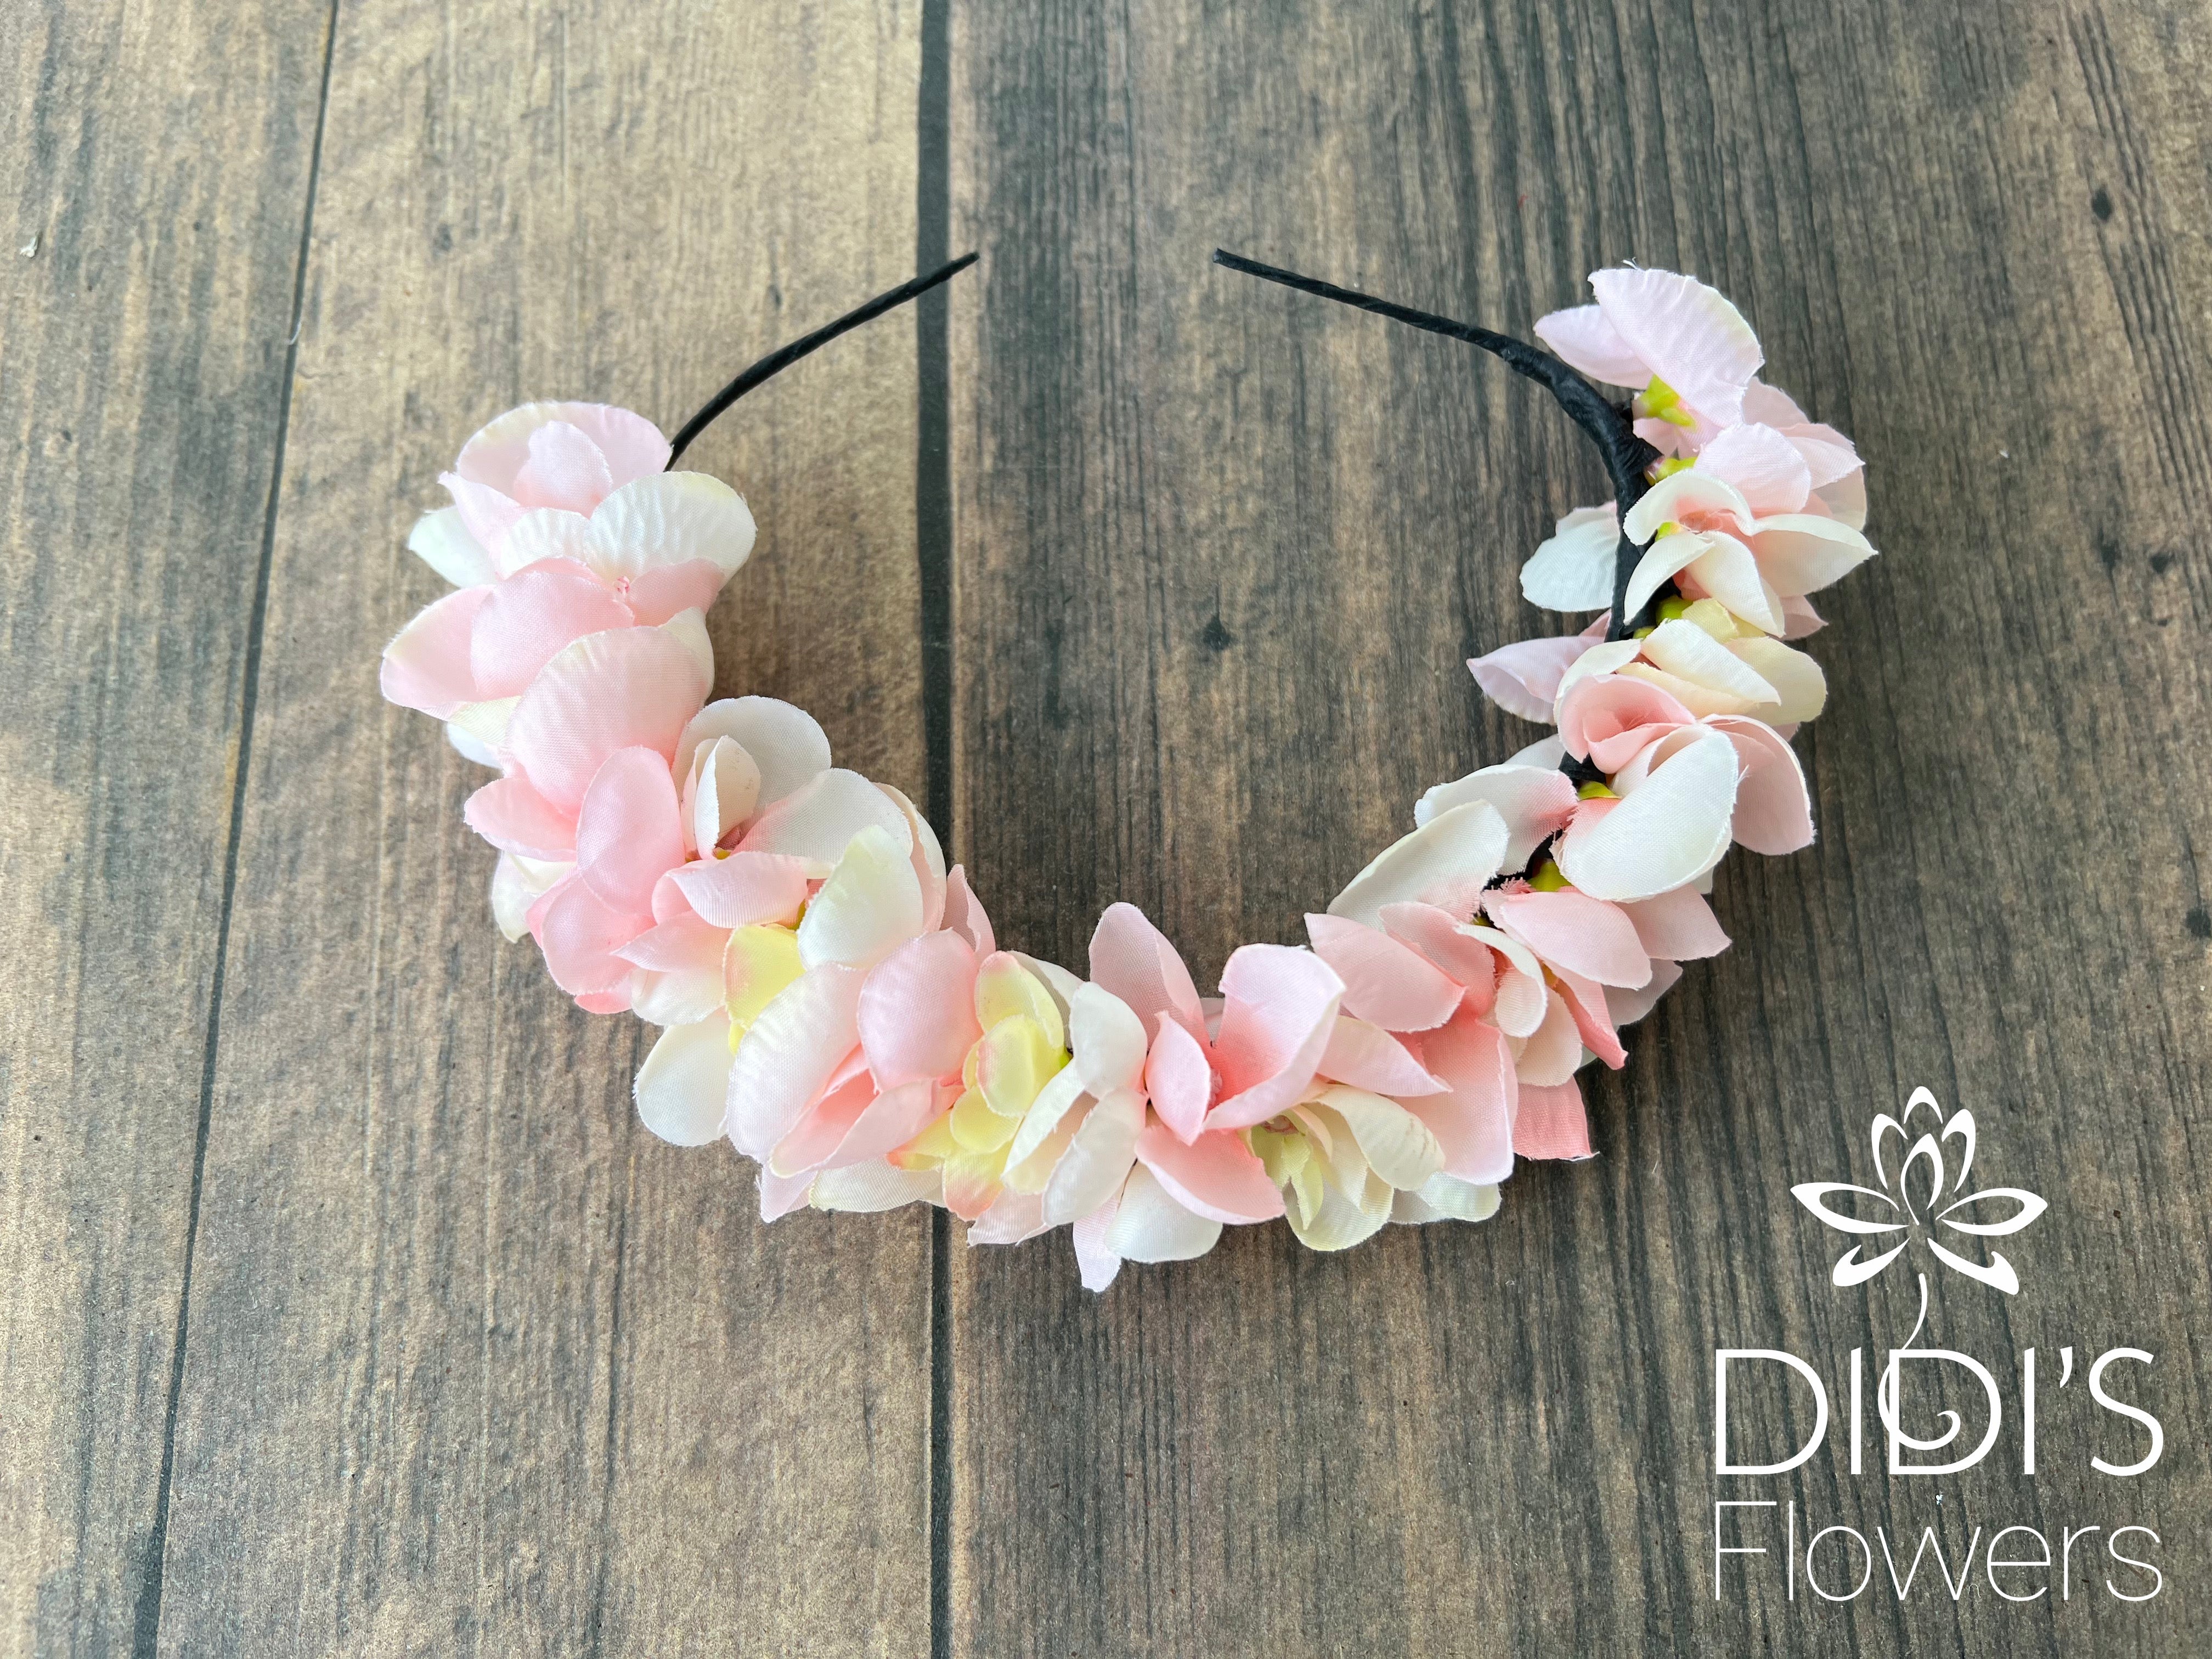 Wisteria Hairpiece Band - Blush Pink